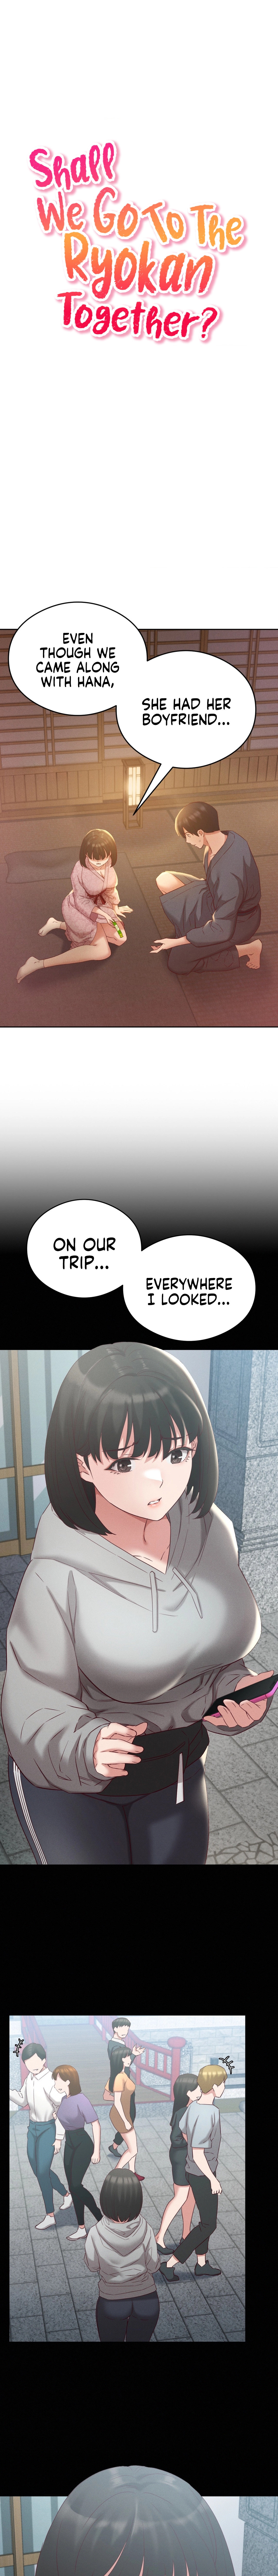 Shall We Go To The Ryokan Together? - Chapter 3 Page 3